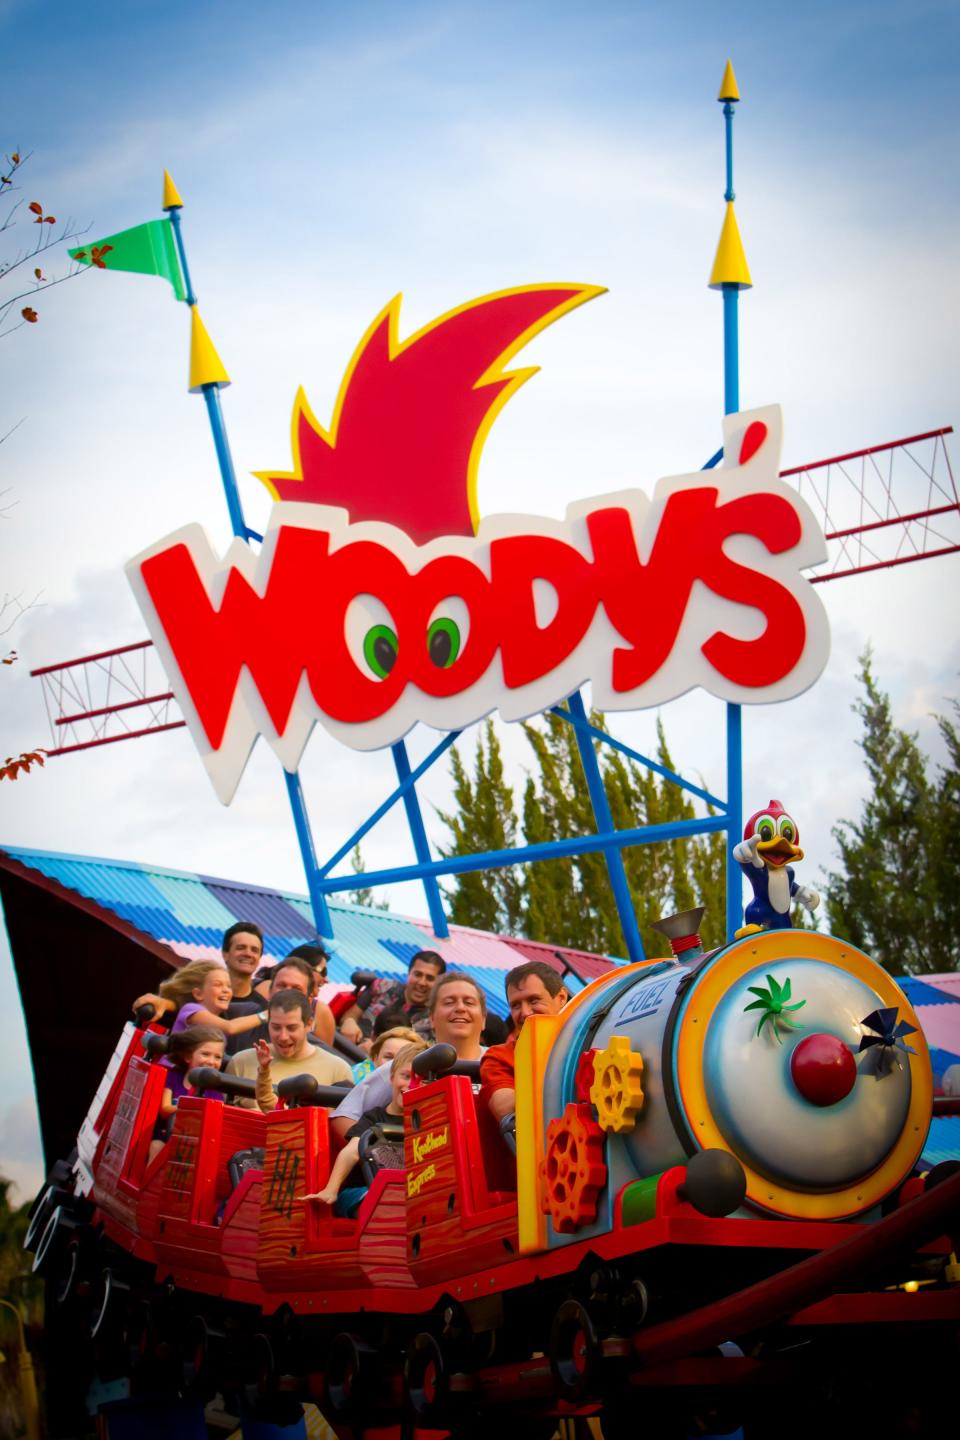 Woody Woodpecker's Nuthouse Coaster is one of several attractions being closed to make way for new family entertainment at Universal Studios Florida.